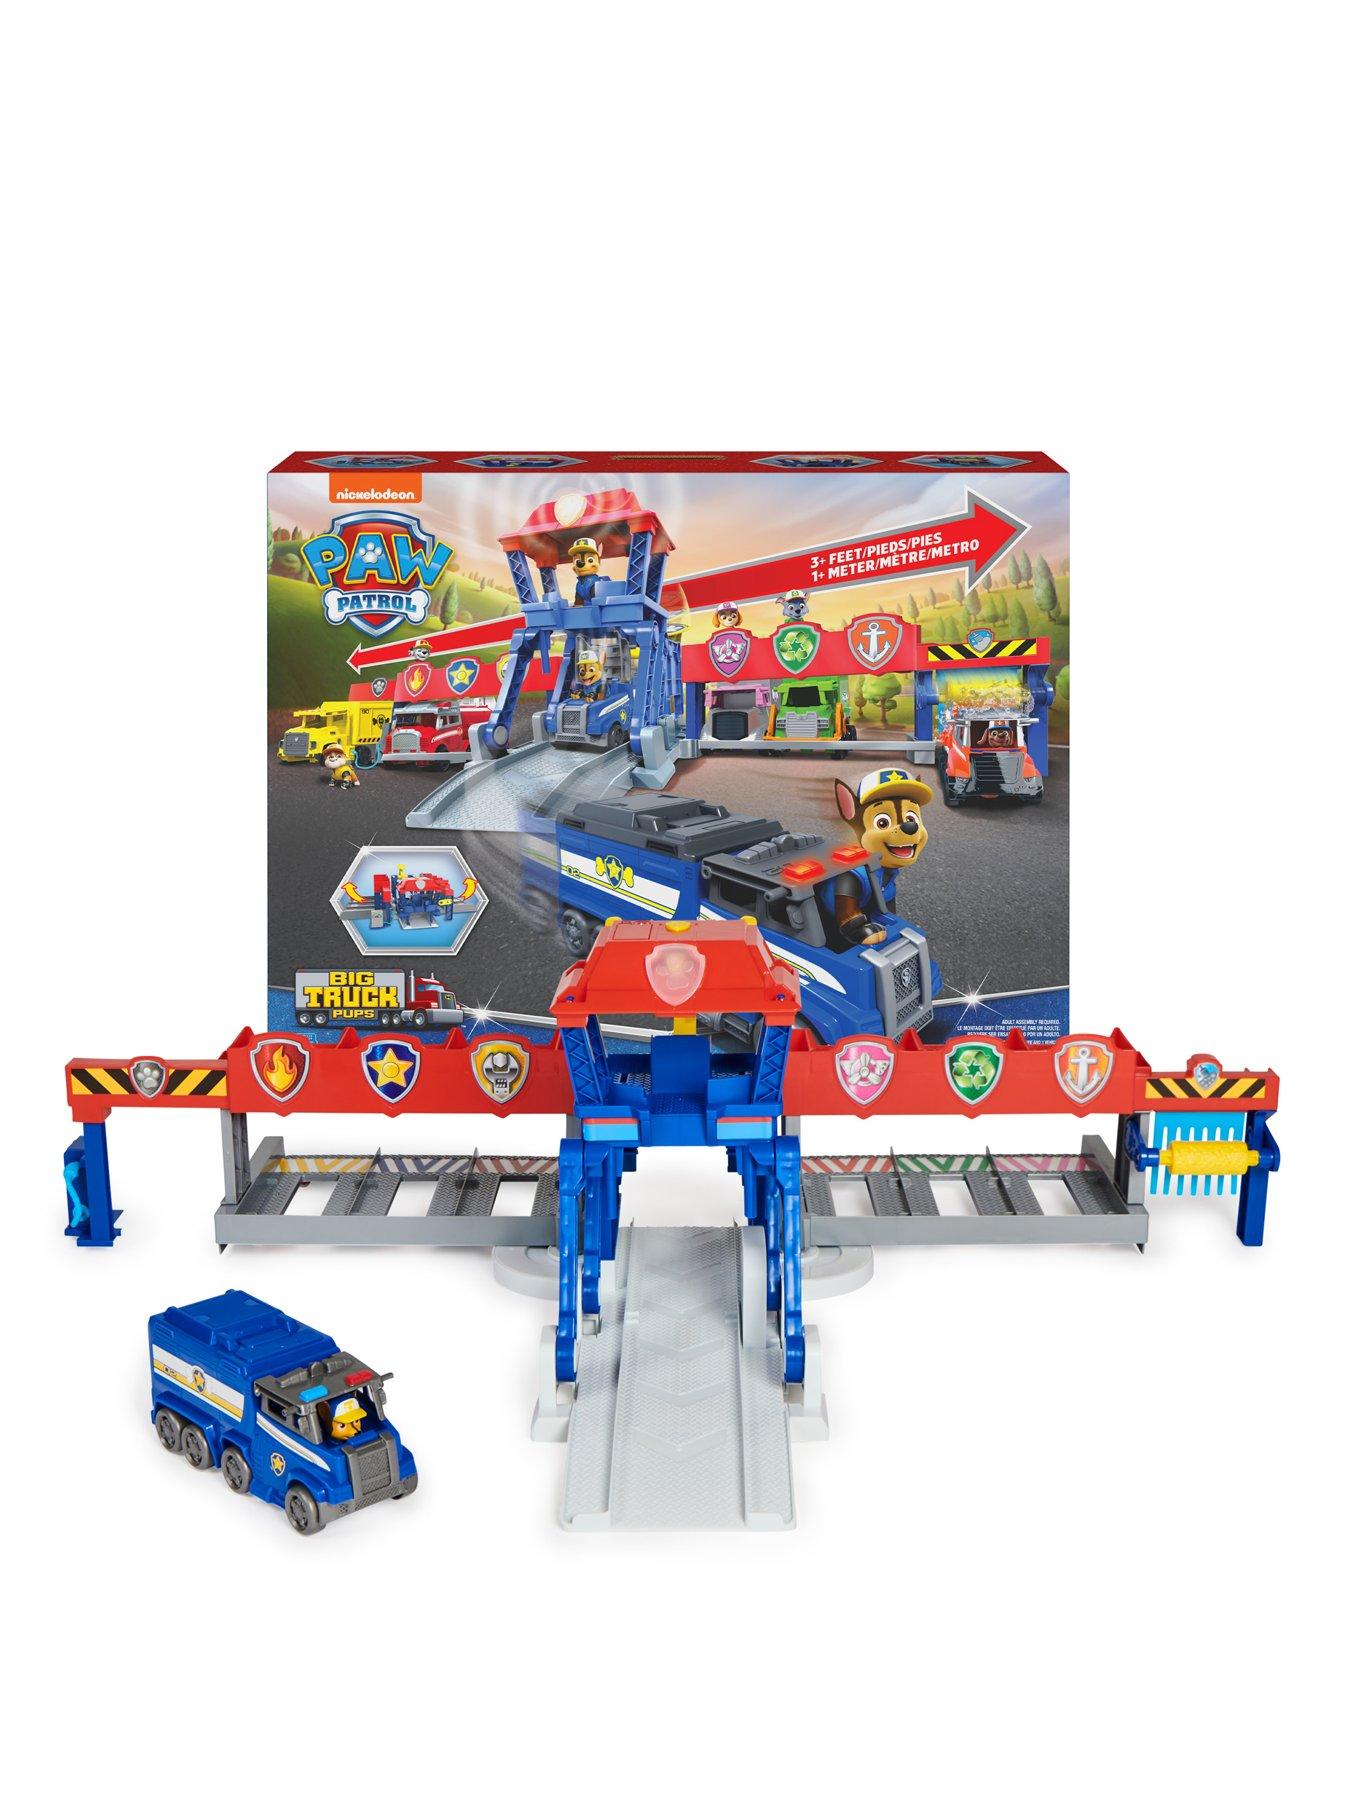 Spin Master Paw Patrol 10th Anniversary - All Paws Gift Set desde 39,98 €